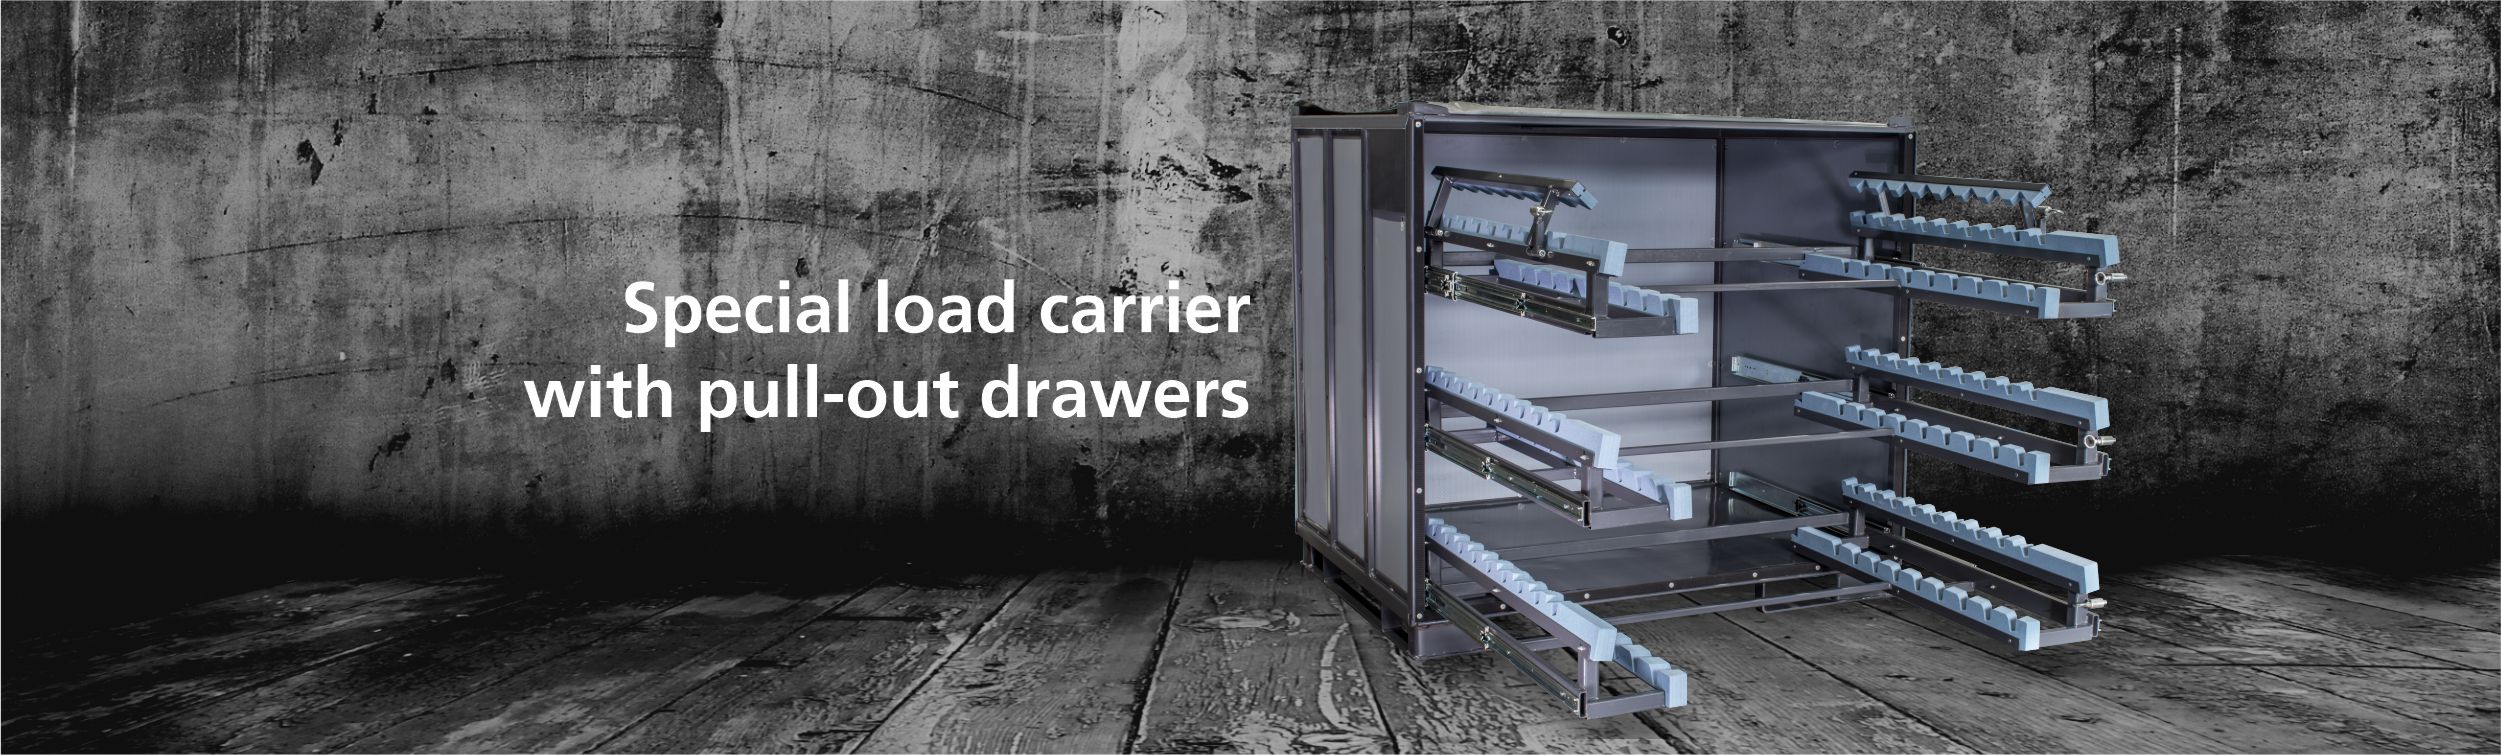 special_load_carrier_pull_out_drawers